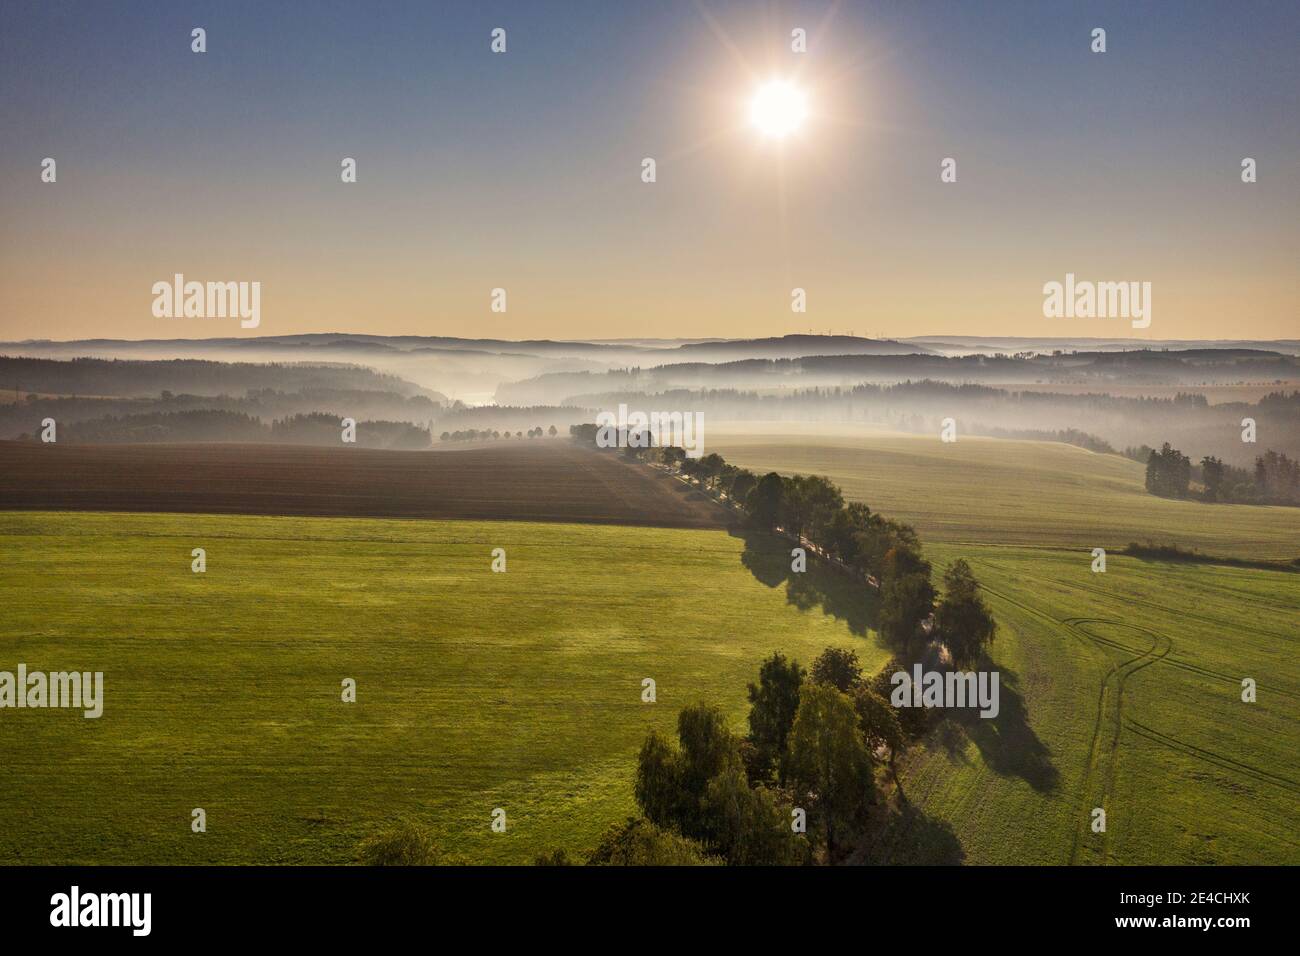 Germany, Thuringia, Remptendorf, landscape, avenue, forests, fields, sun Stock Photo